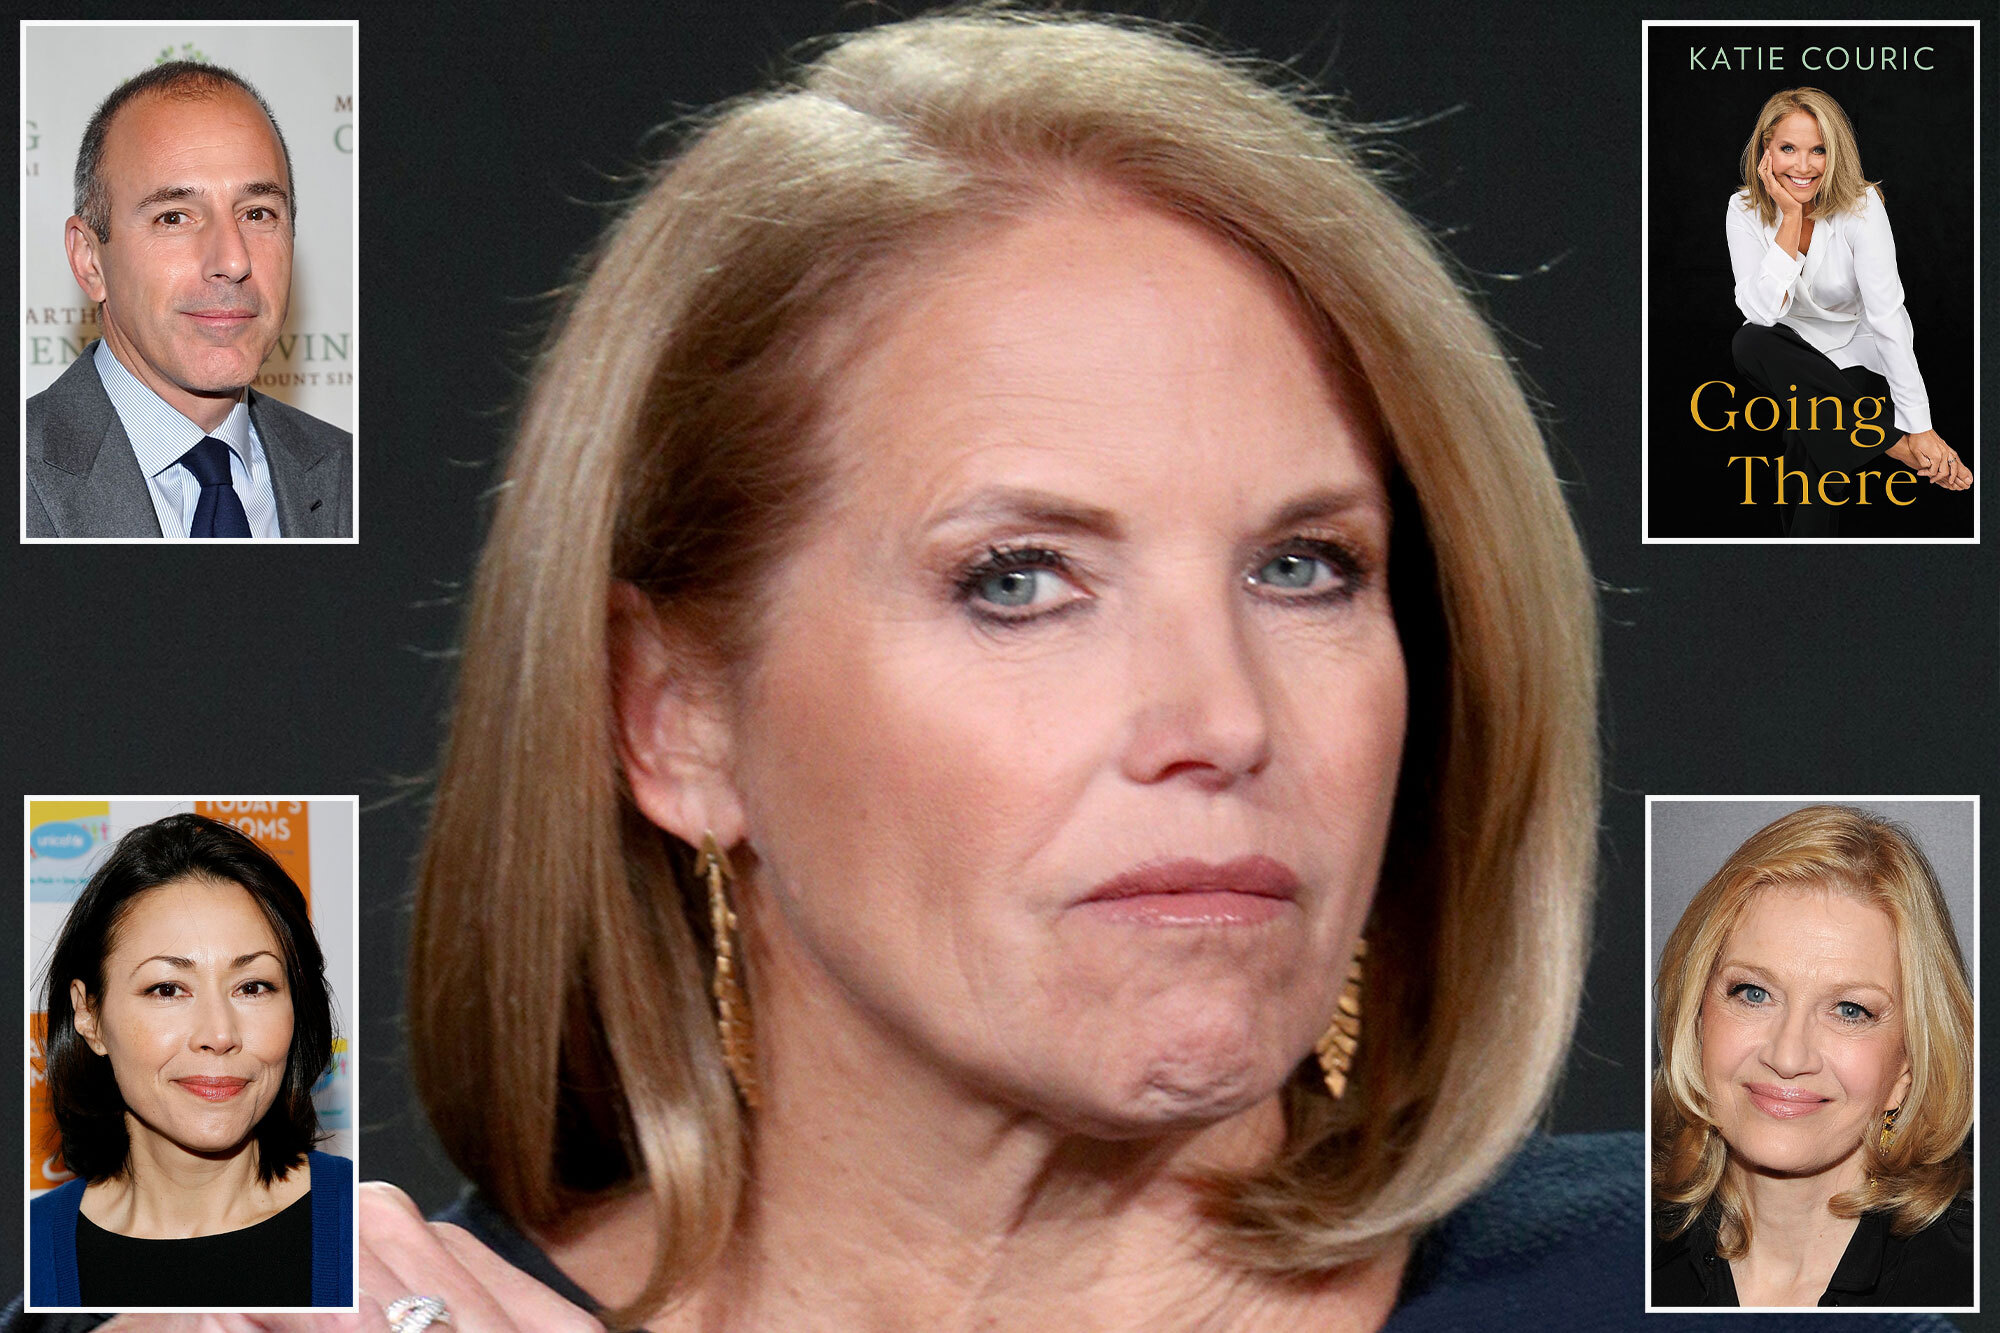 christine demers recommends katie couric nude pictures pic